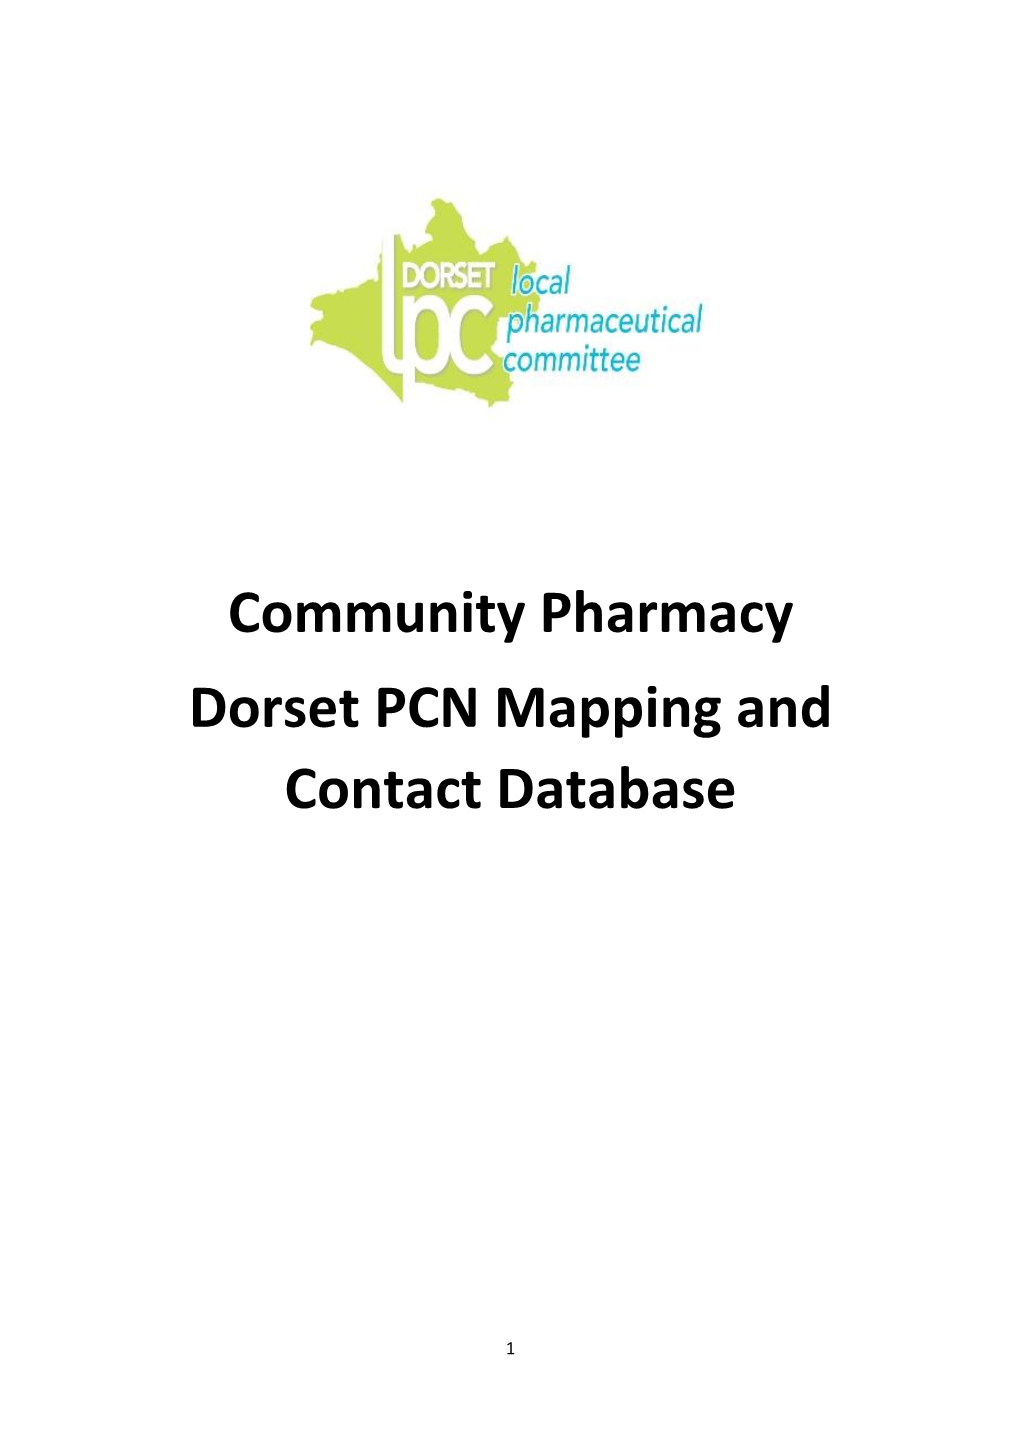 Community Pharmacy Dorset PCN Mapping and Contact Database